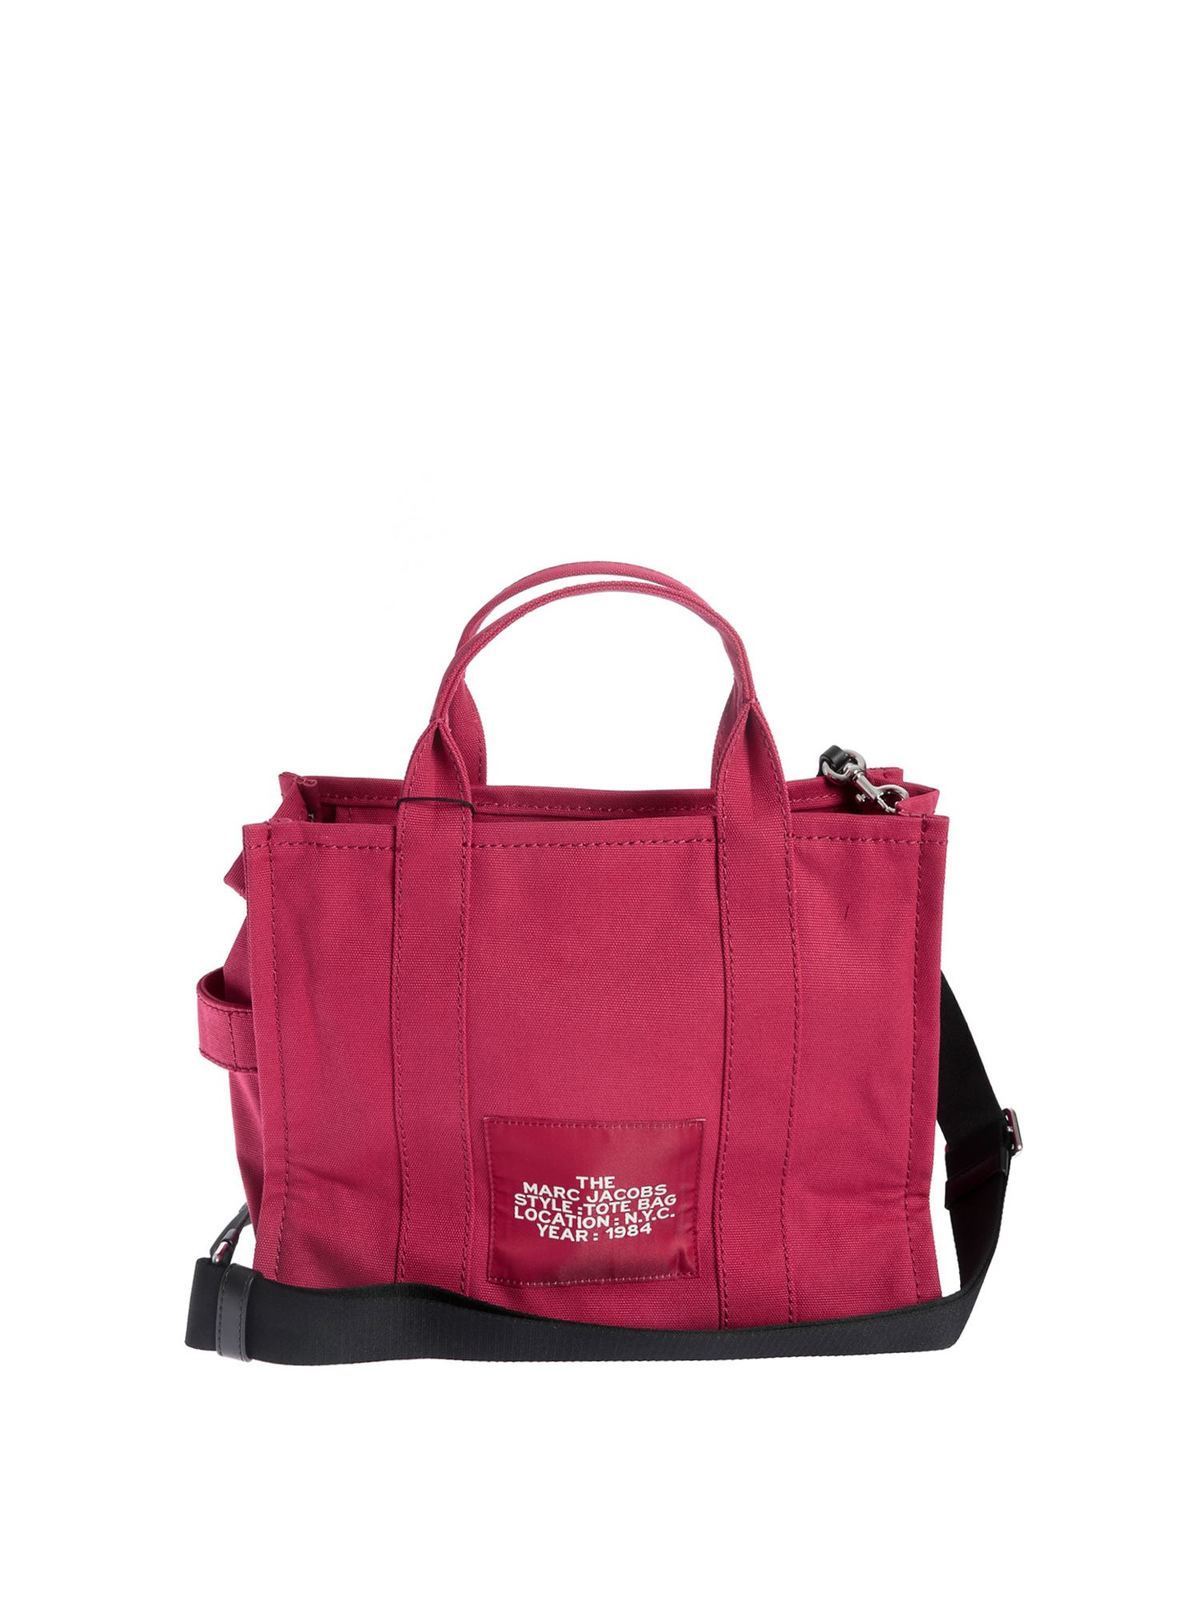 Totes bags Marc Jacobs - The Traveler tote bag in red - M0016161601